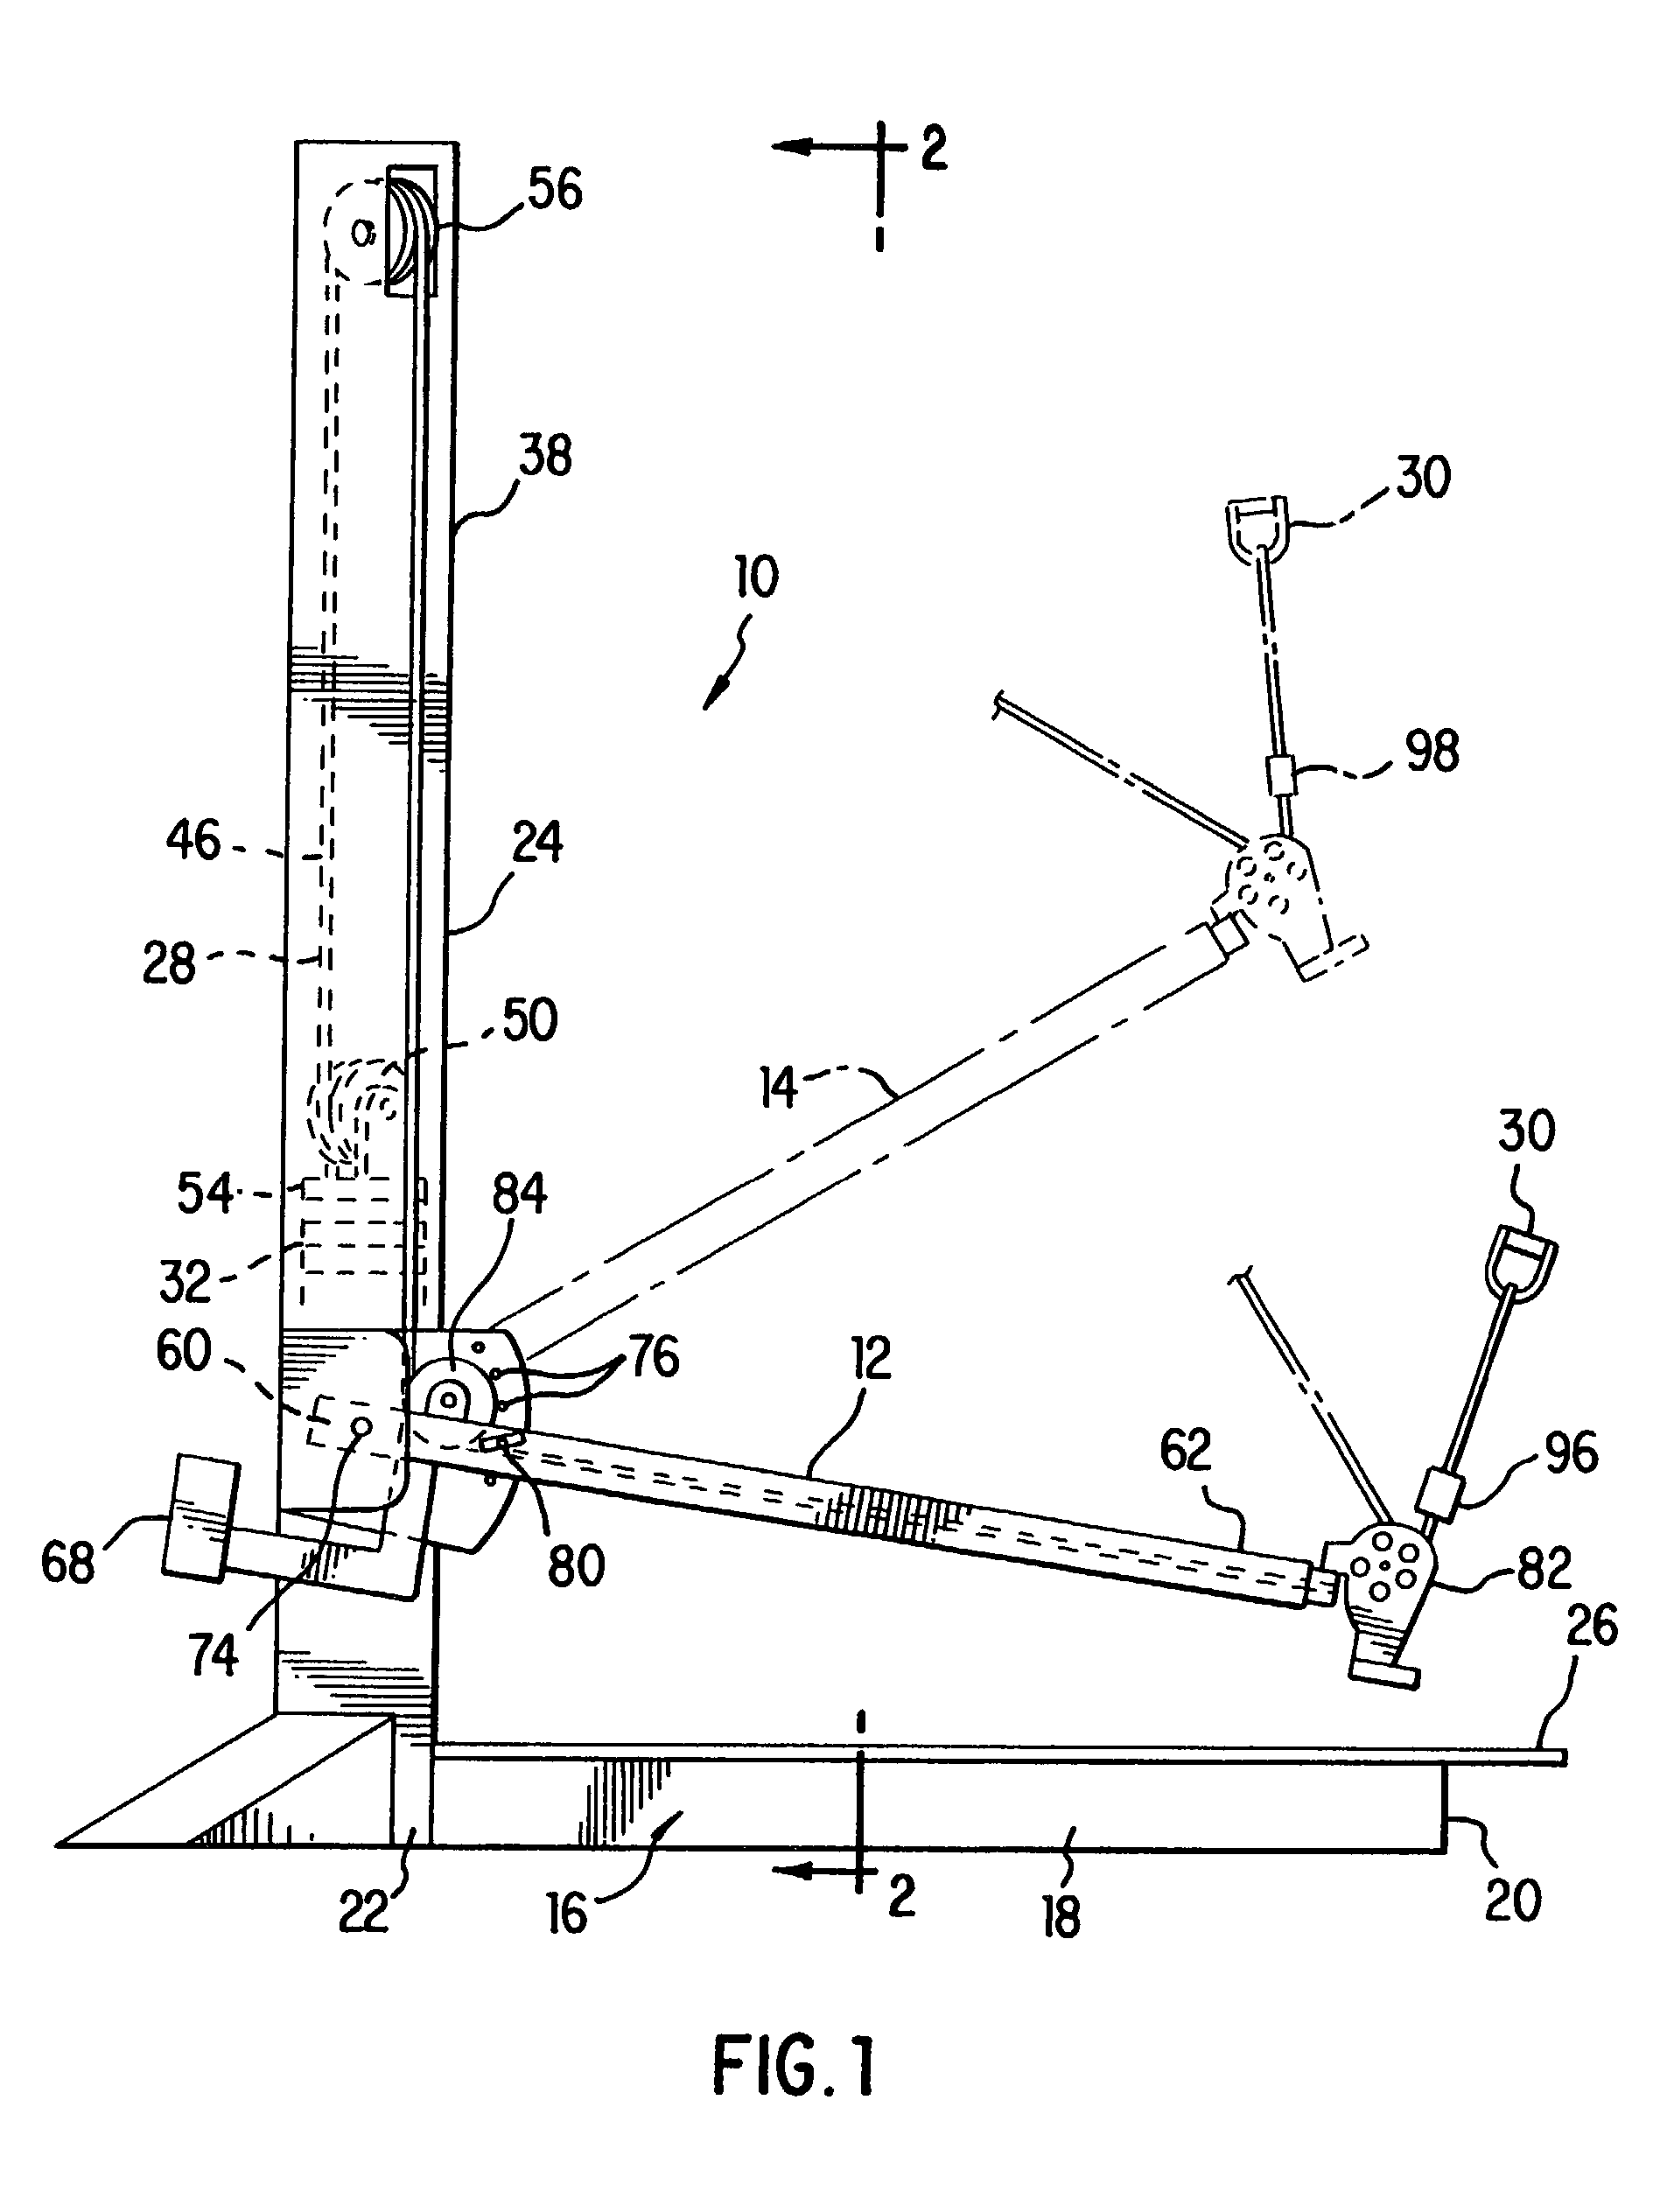 Cable crossover exercise apparatus